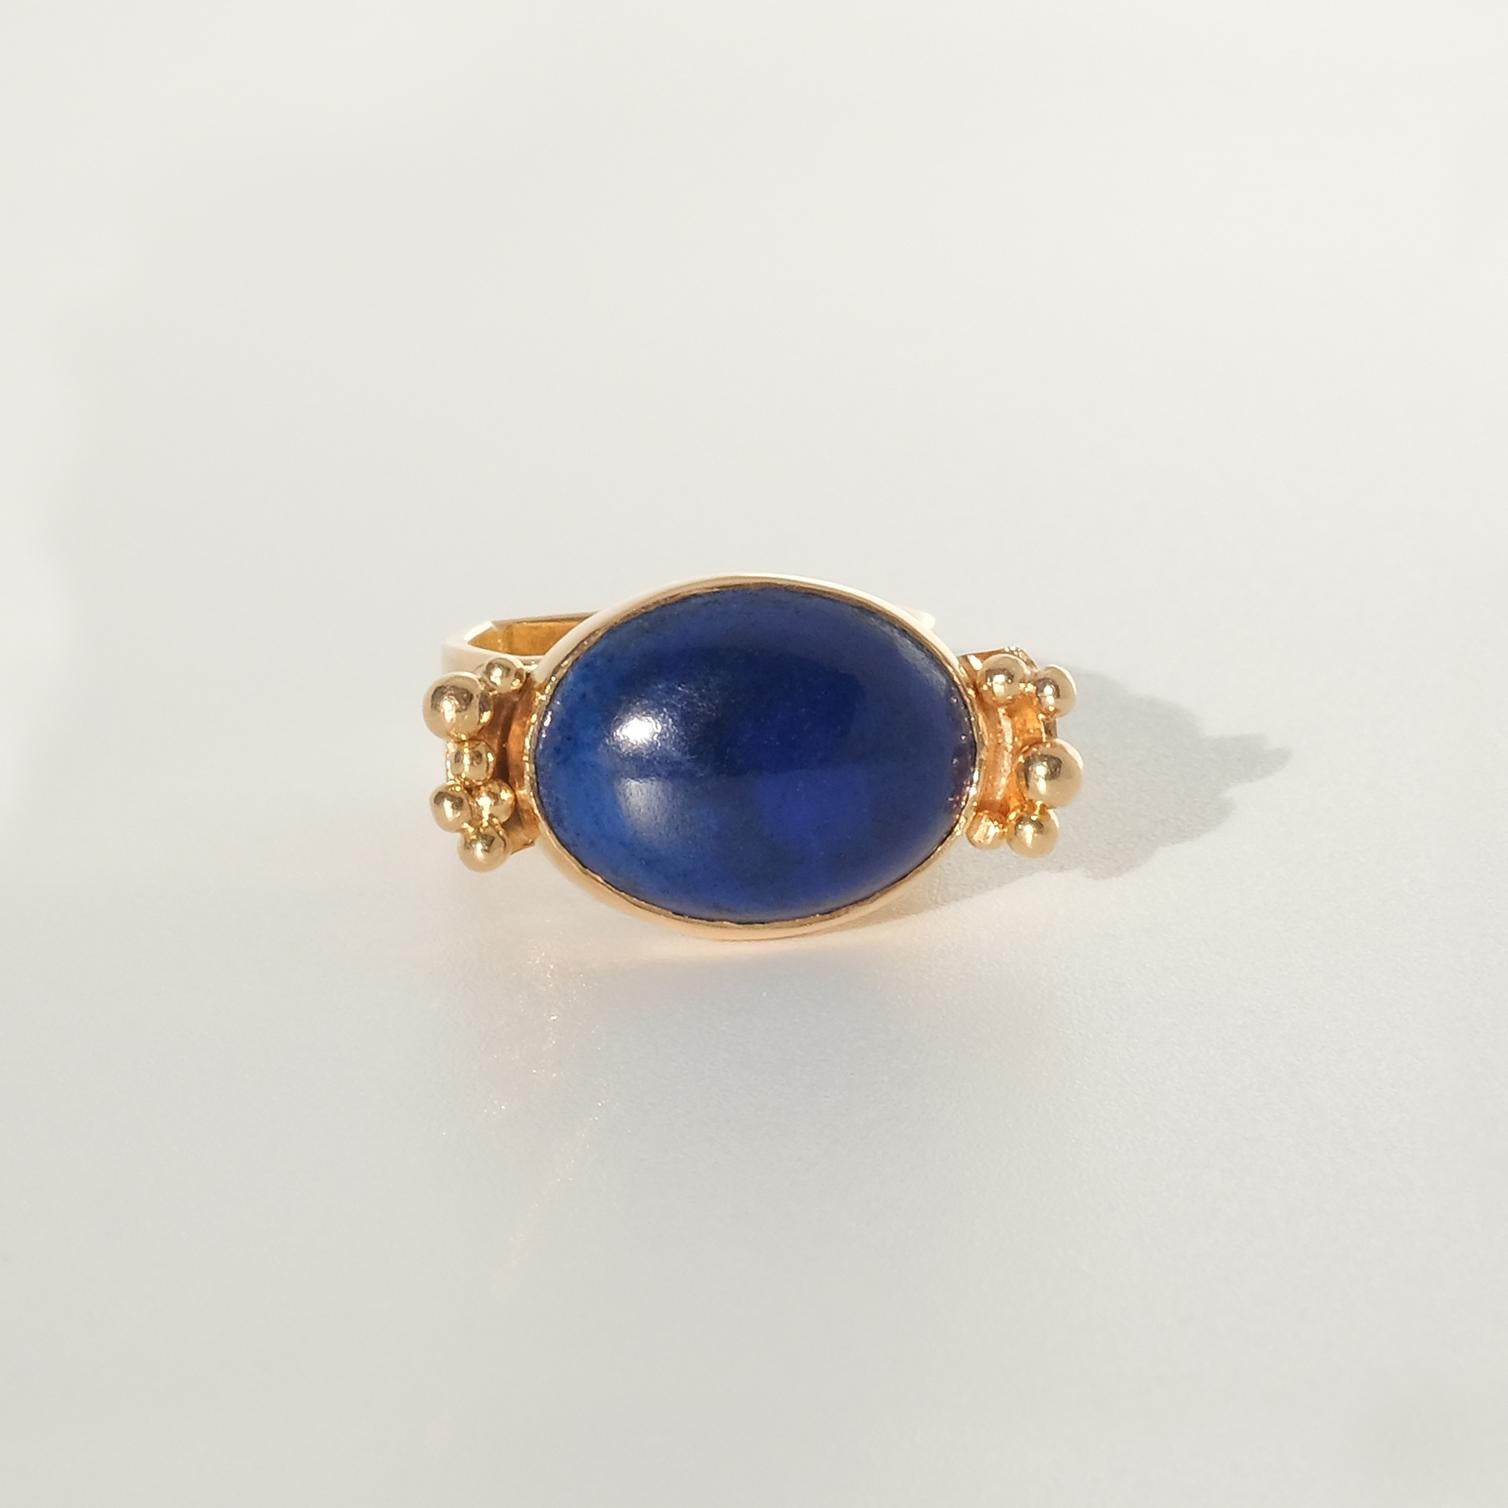 18 K Gold Ring with a Cabochon Cut Lapis Lazuli Stone, Made in 1972 For Sale 4